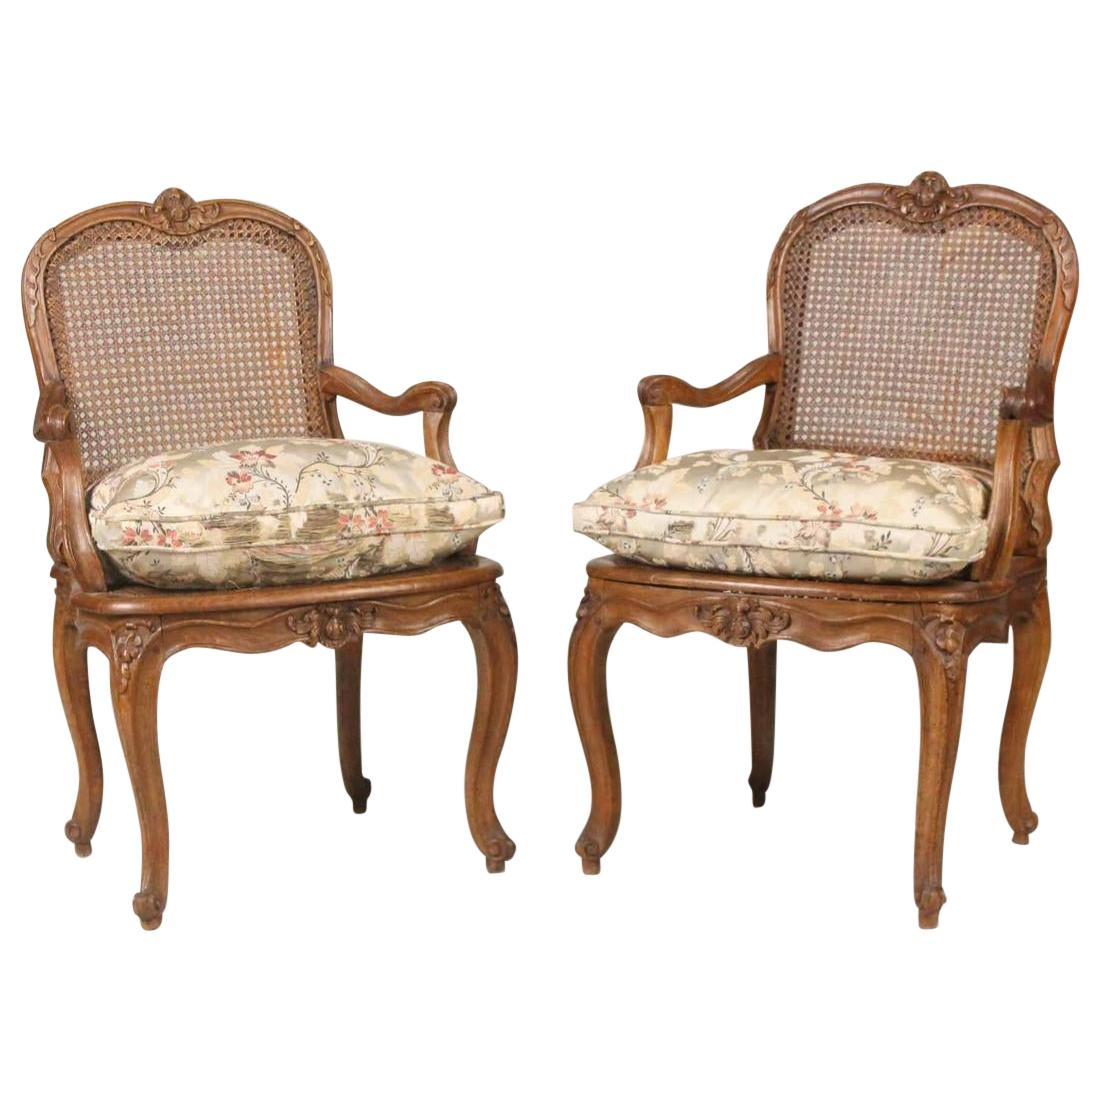 Pair of Louis XV Fauteuils, Signed "Courtois", circa 1760